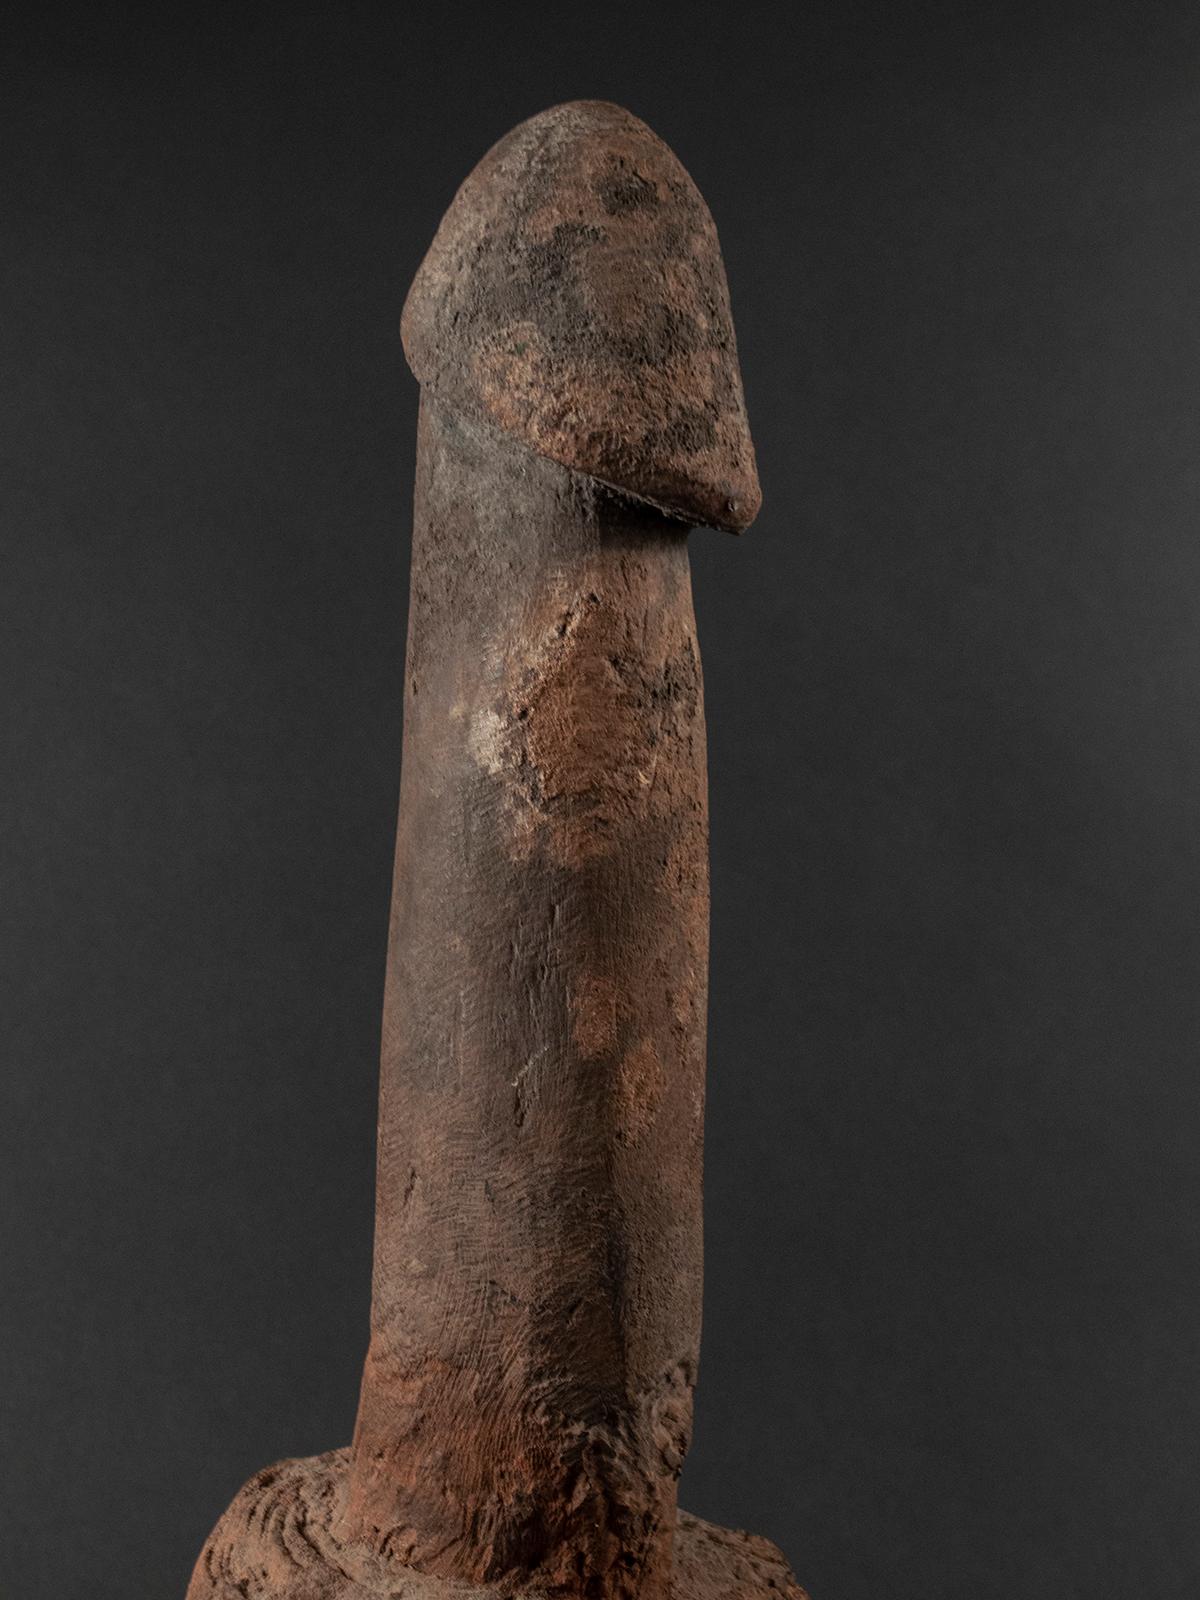 Hand-Crafted Late 19th-Early 20th Century Wood Legba Phallus, Fon People, West Africa